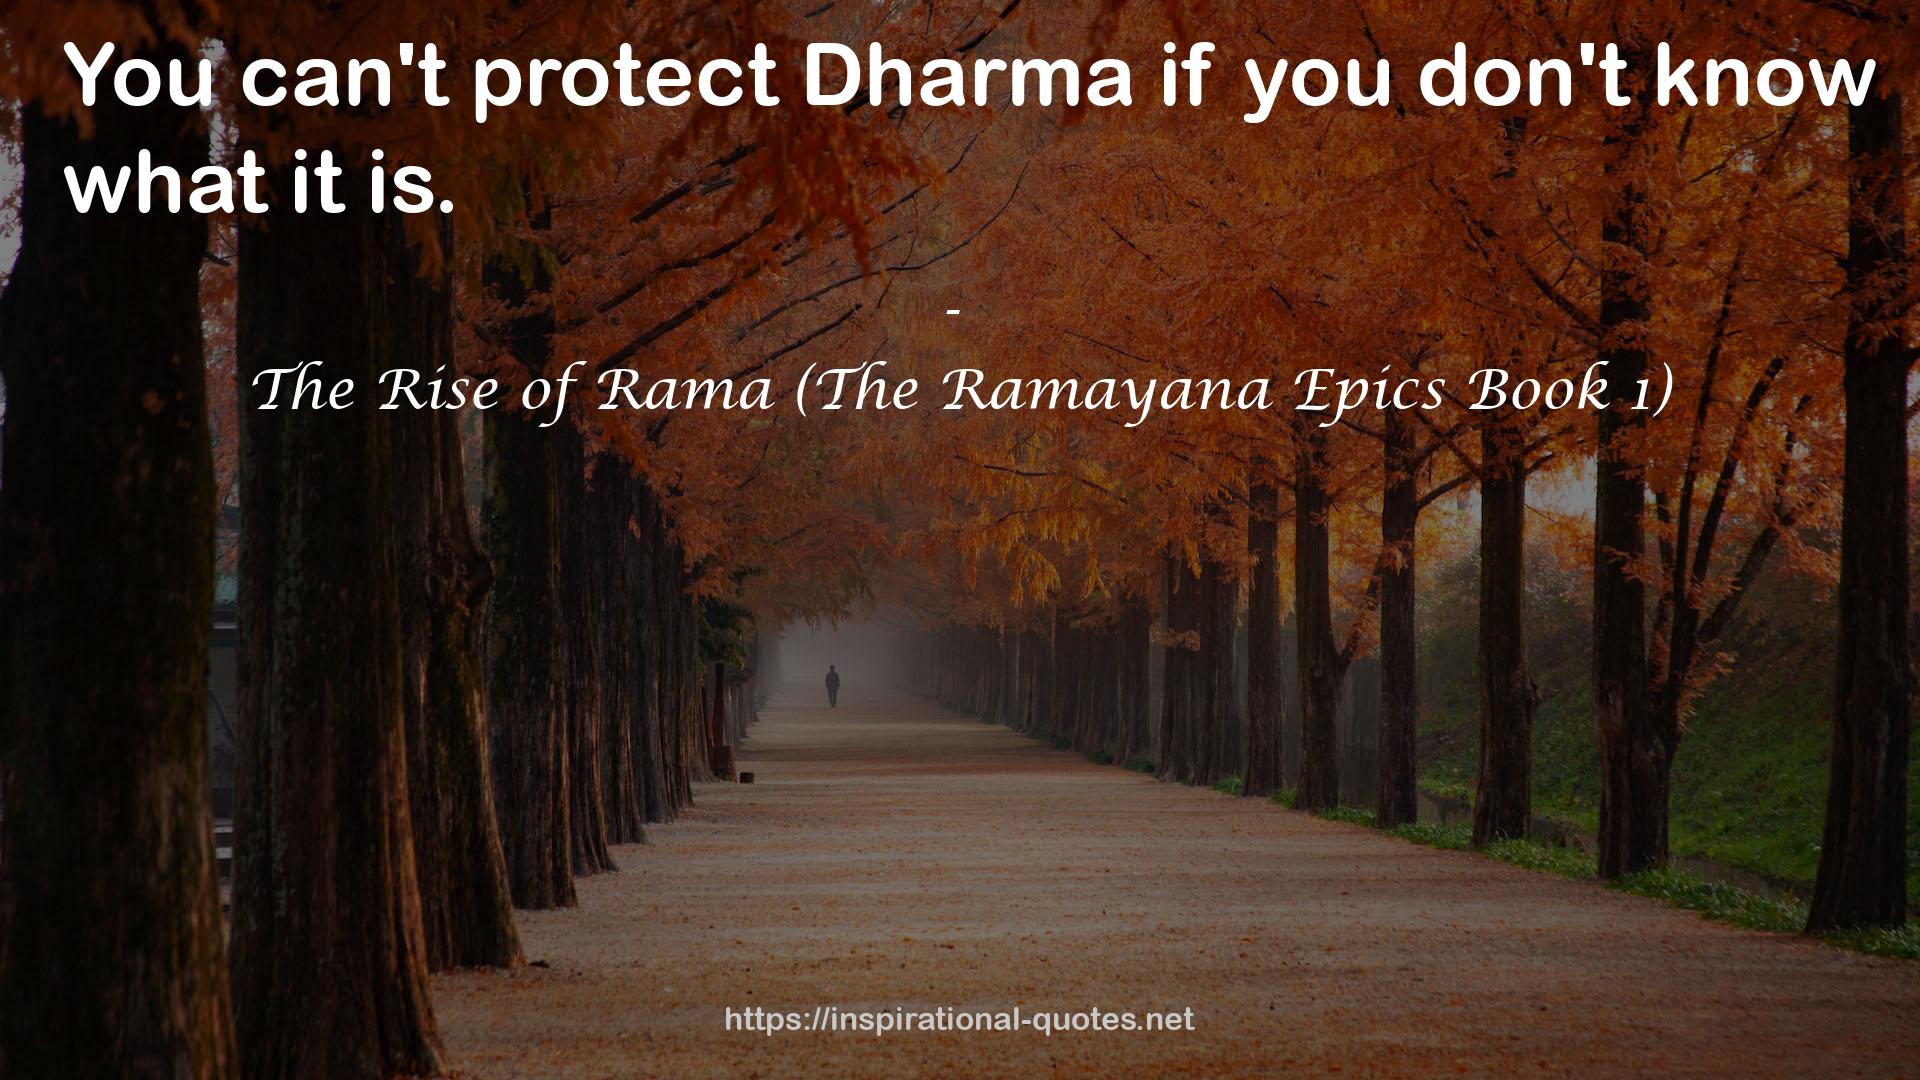 The Rise of Rama (The Ramayana Epics Book 1) QUOTES